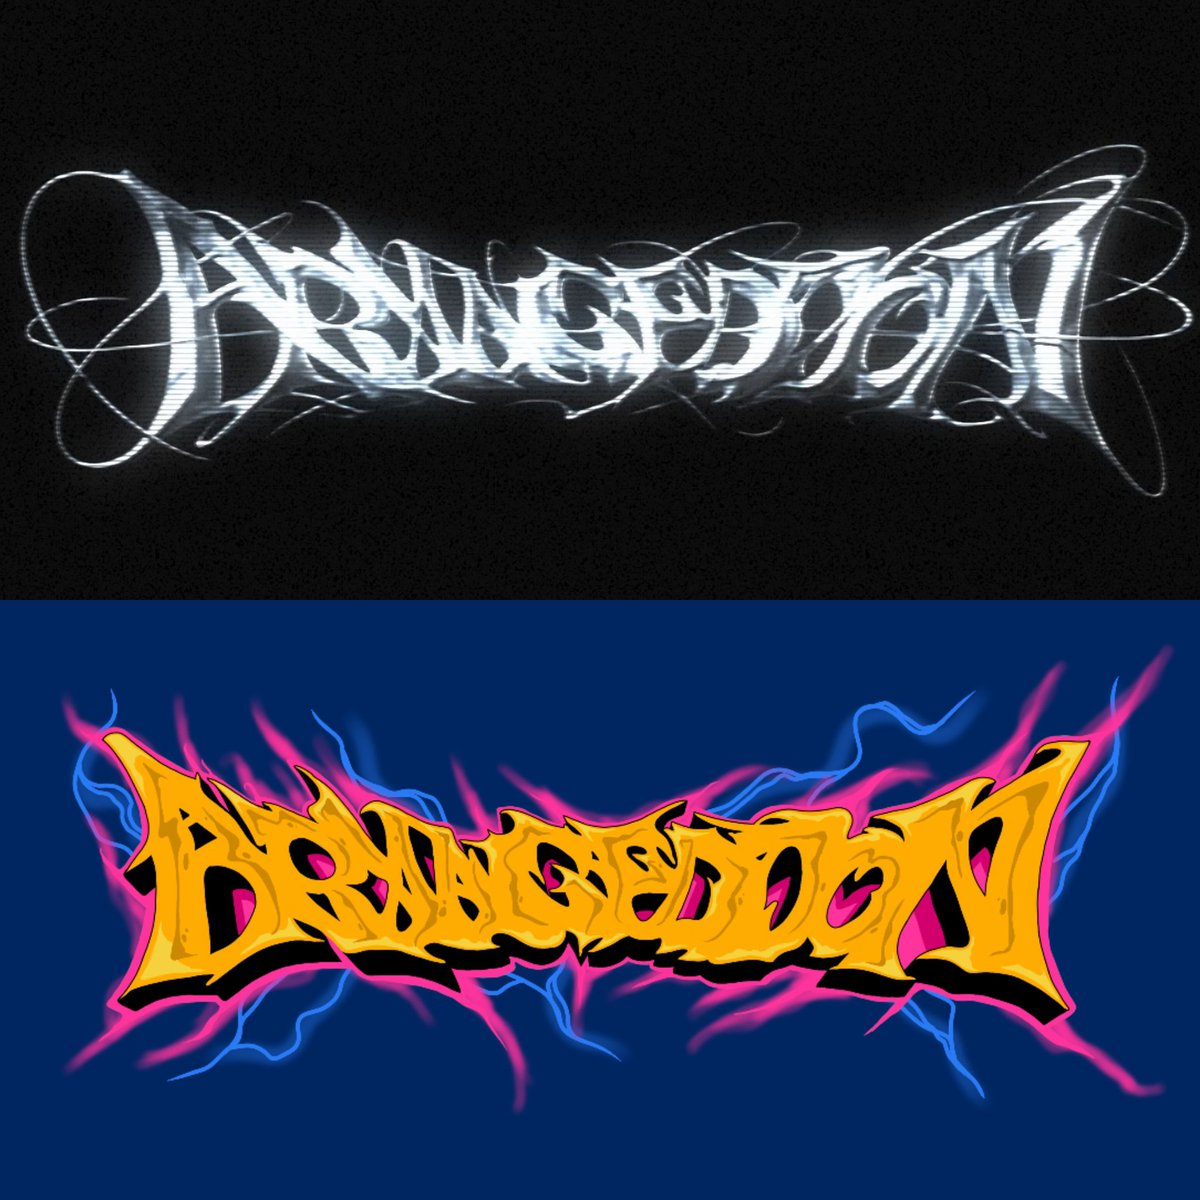 tracing @aespa_official's ARMAGEDDON official font and remake it with my own style #aespa #에스파